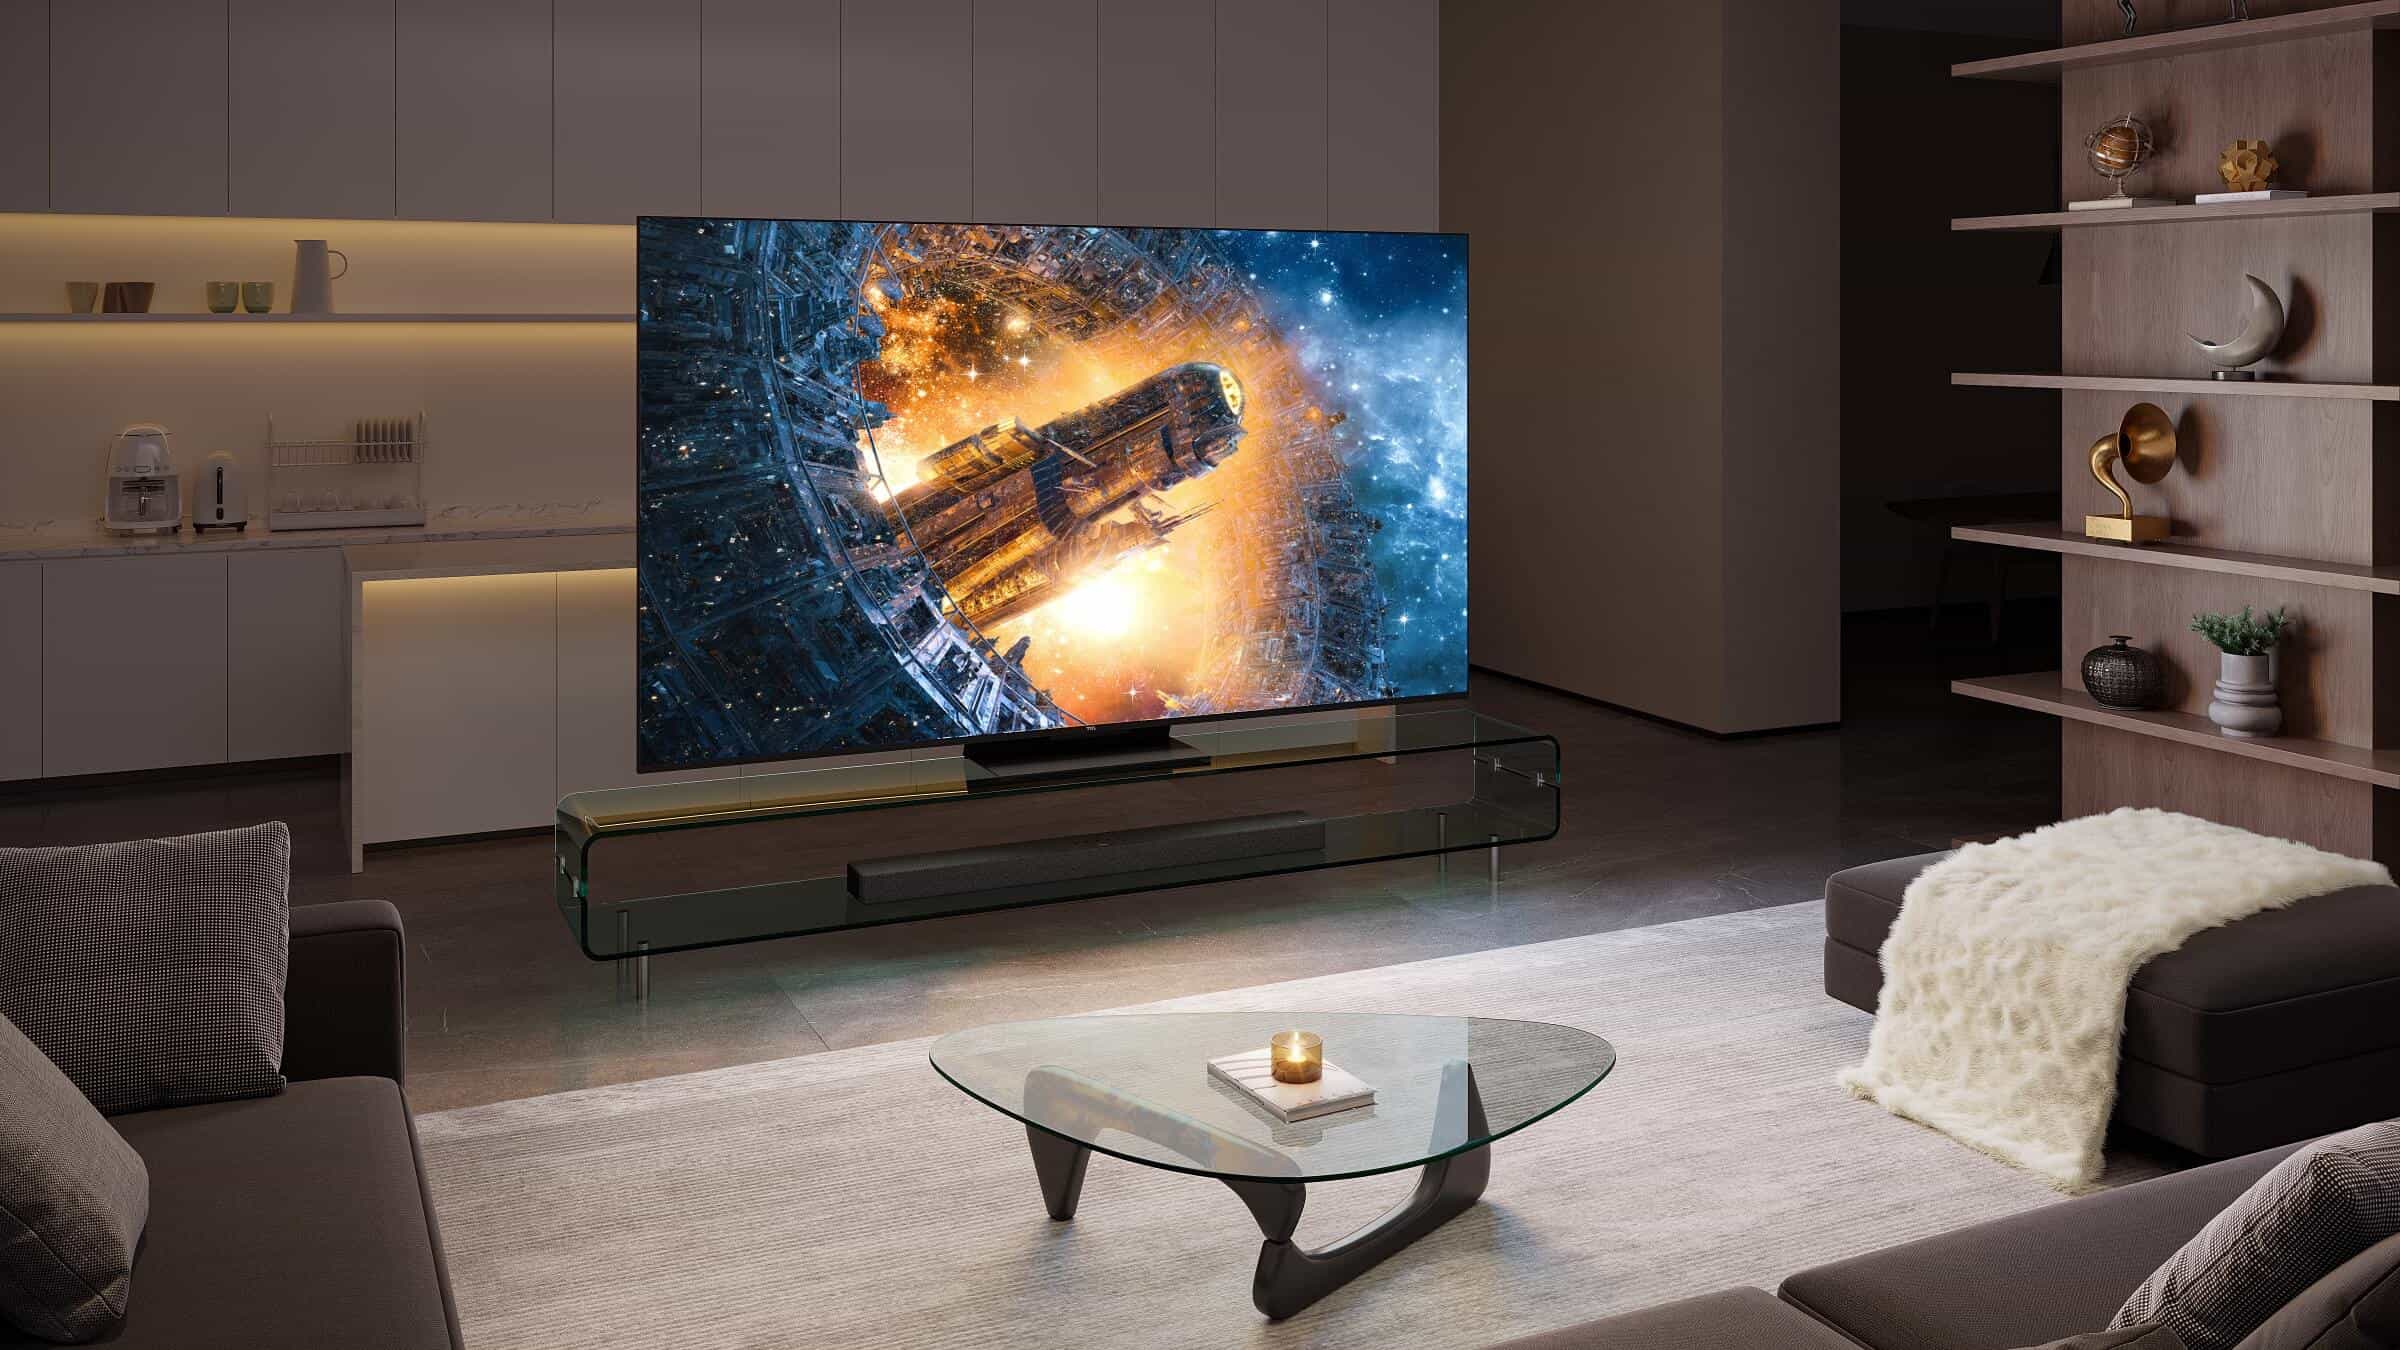 CyberShack on X: TCL's C845 Mini LED model is the perfect TV no matter  what type of content you love to watch. The C845's full array backlight  provides exceptional dimming precision thanks